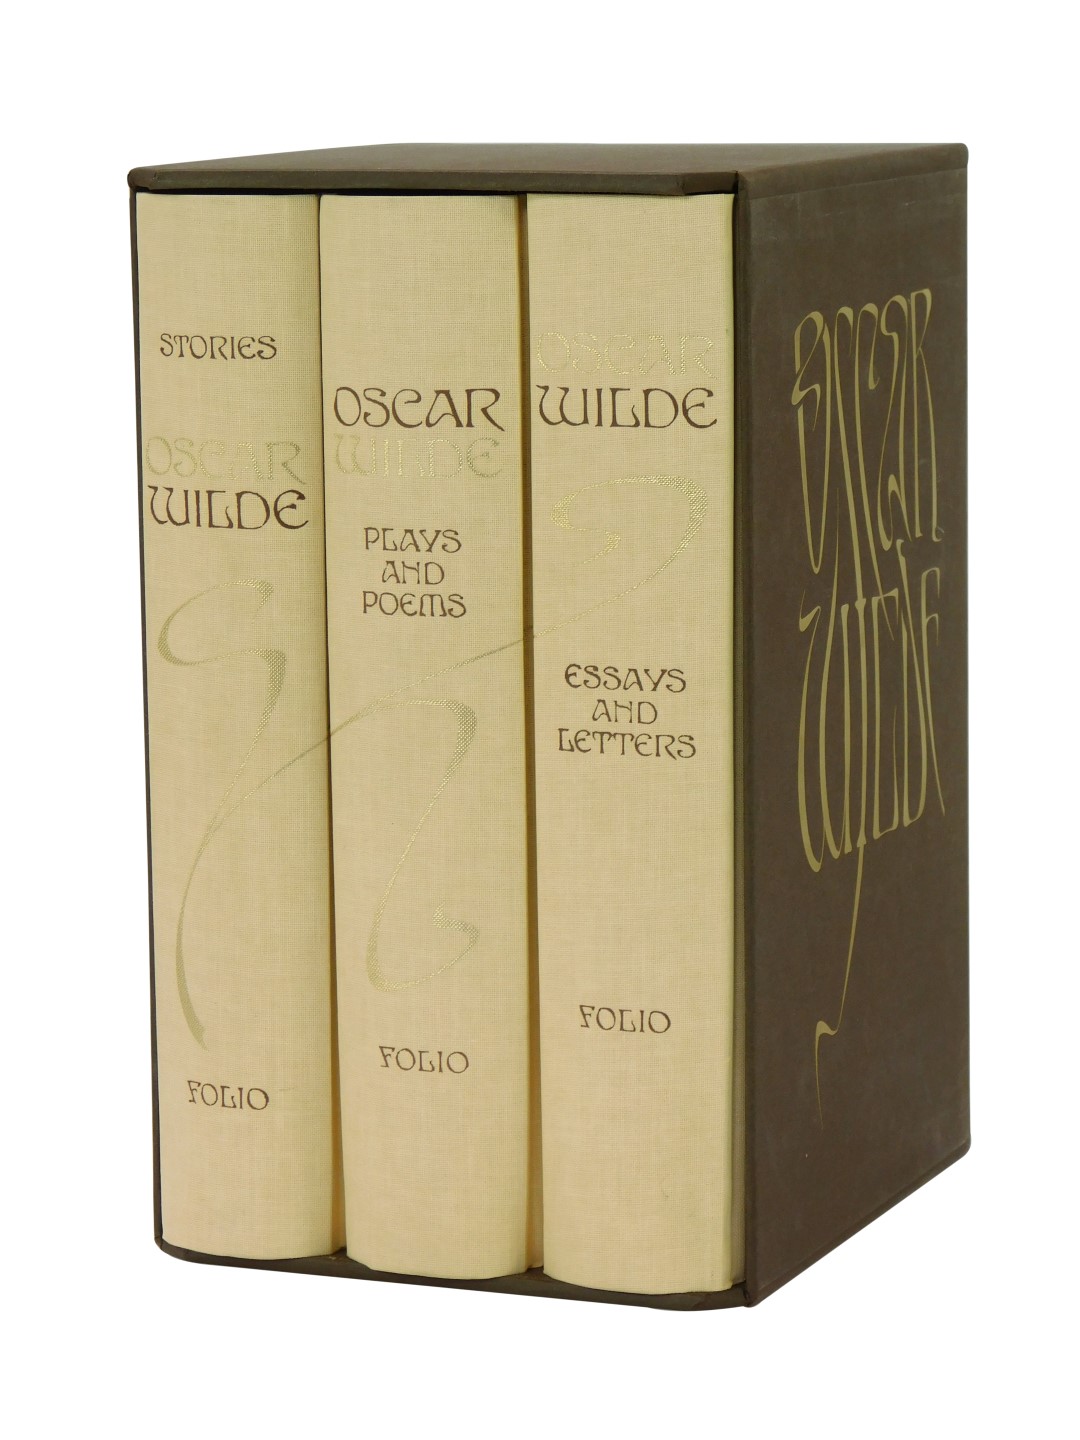 Wilde (Oscar). Stories, Plays and Poems, Essays and Letters, 3 volumes in slip case published by the